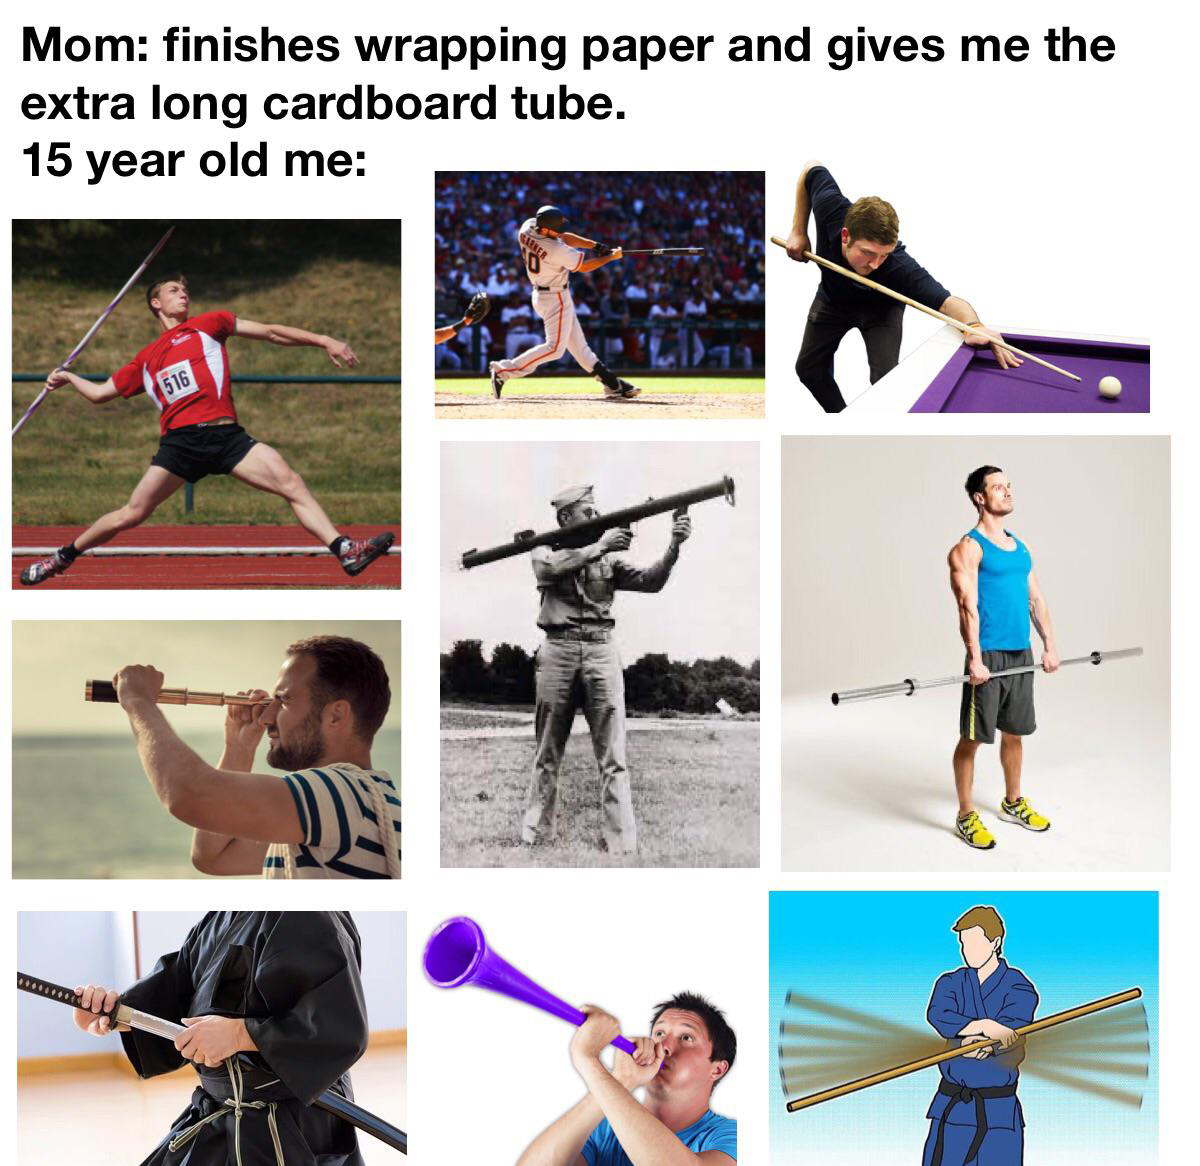 shoulder - Mom finishes wrapping paper and gives me the extra long cardboard tube. 15 year old me 516